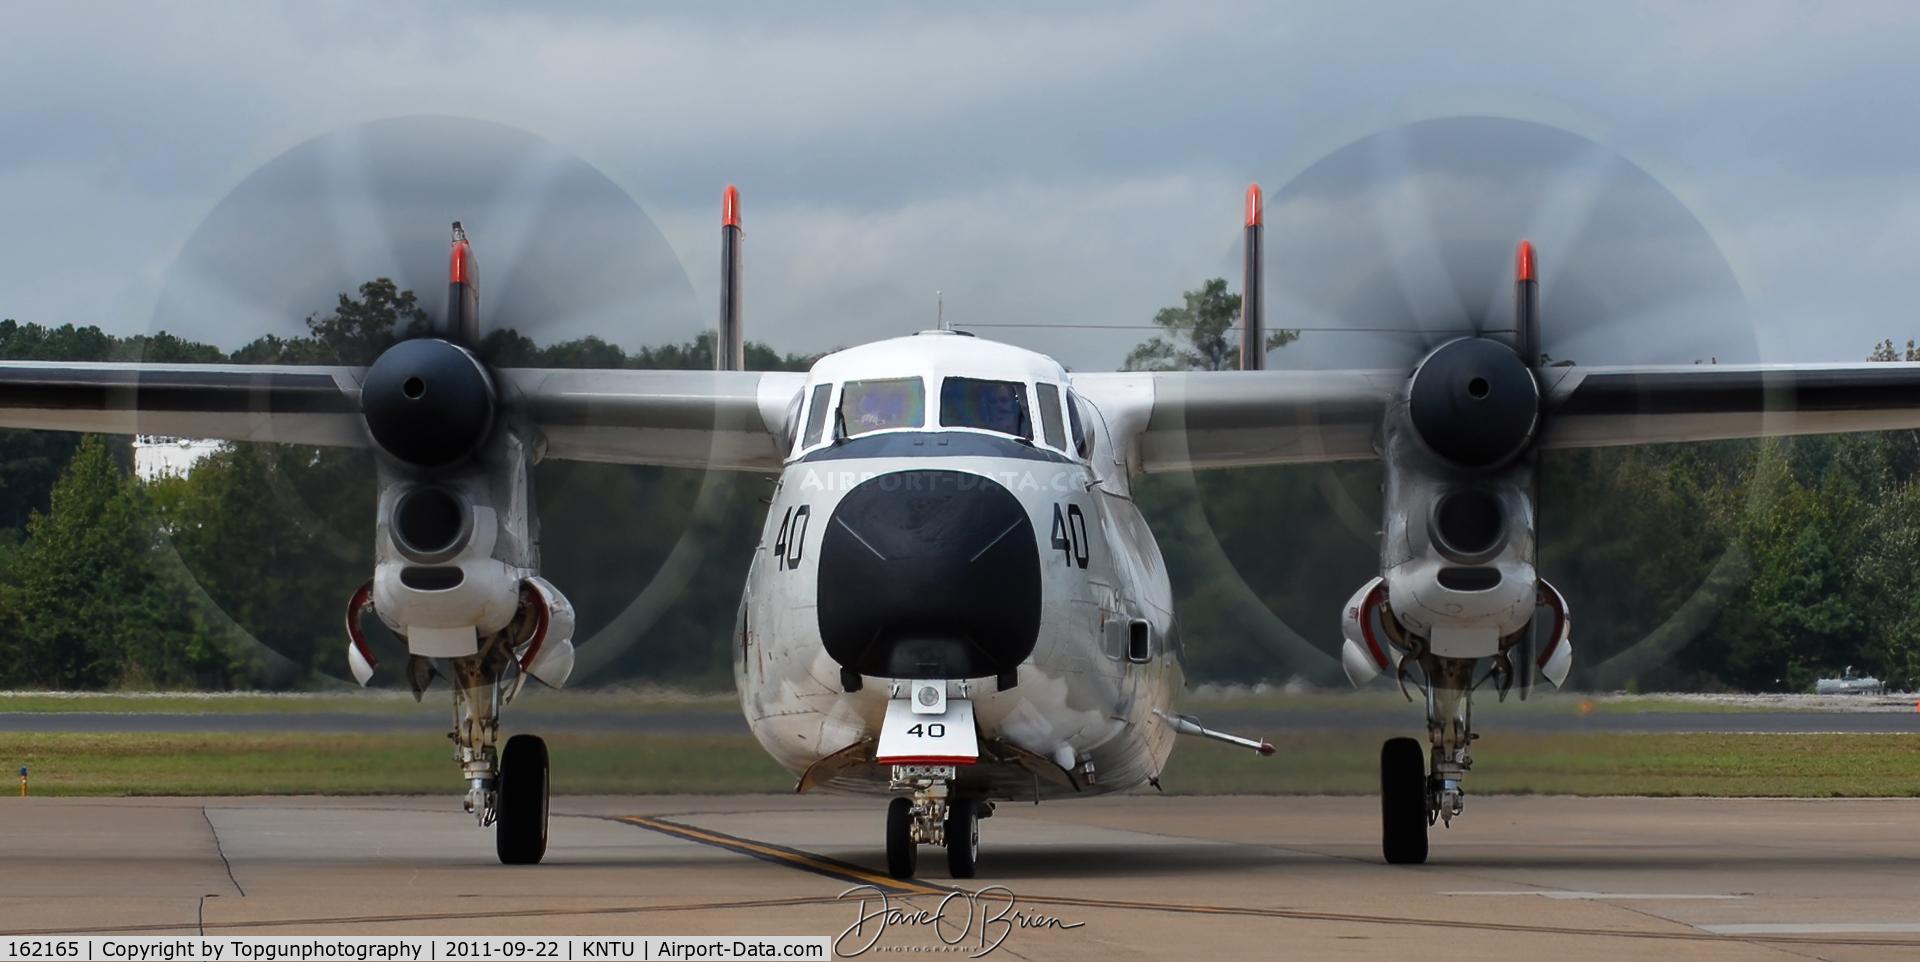 162165, Grumman C-2A Greyhound C/N 45, COD taxing to the tarmac for static display at Oceana 2011